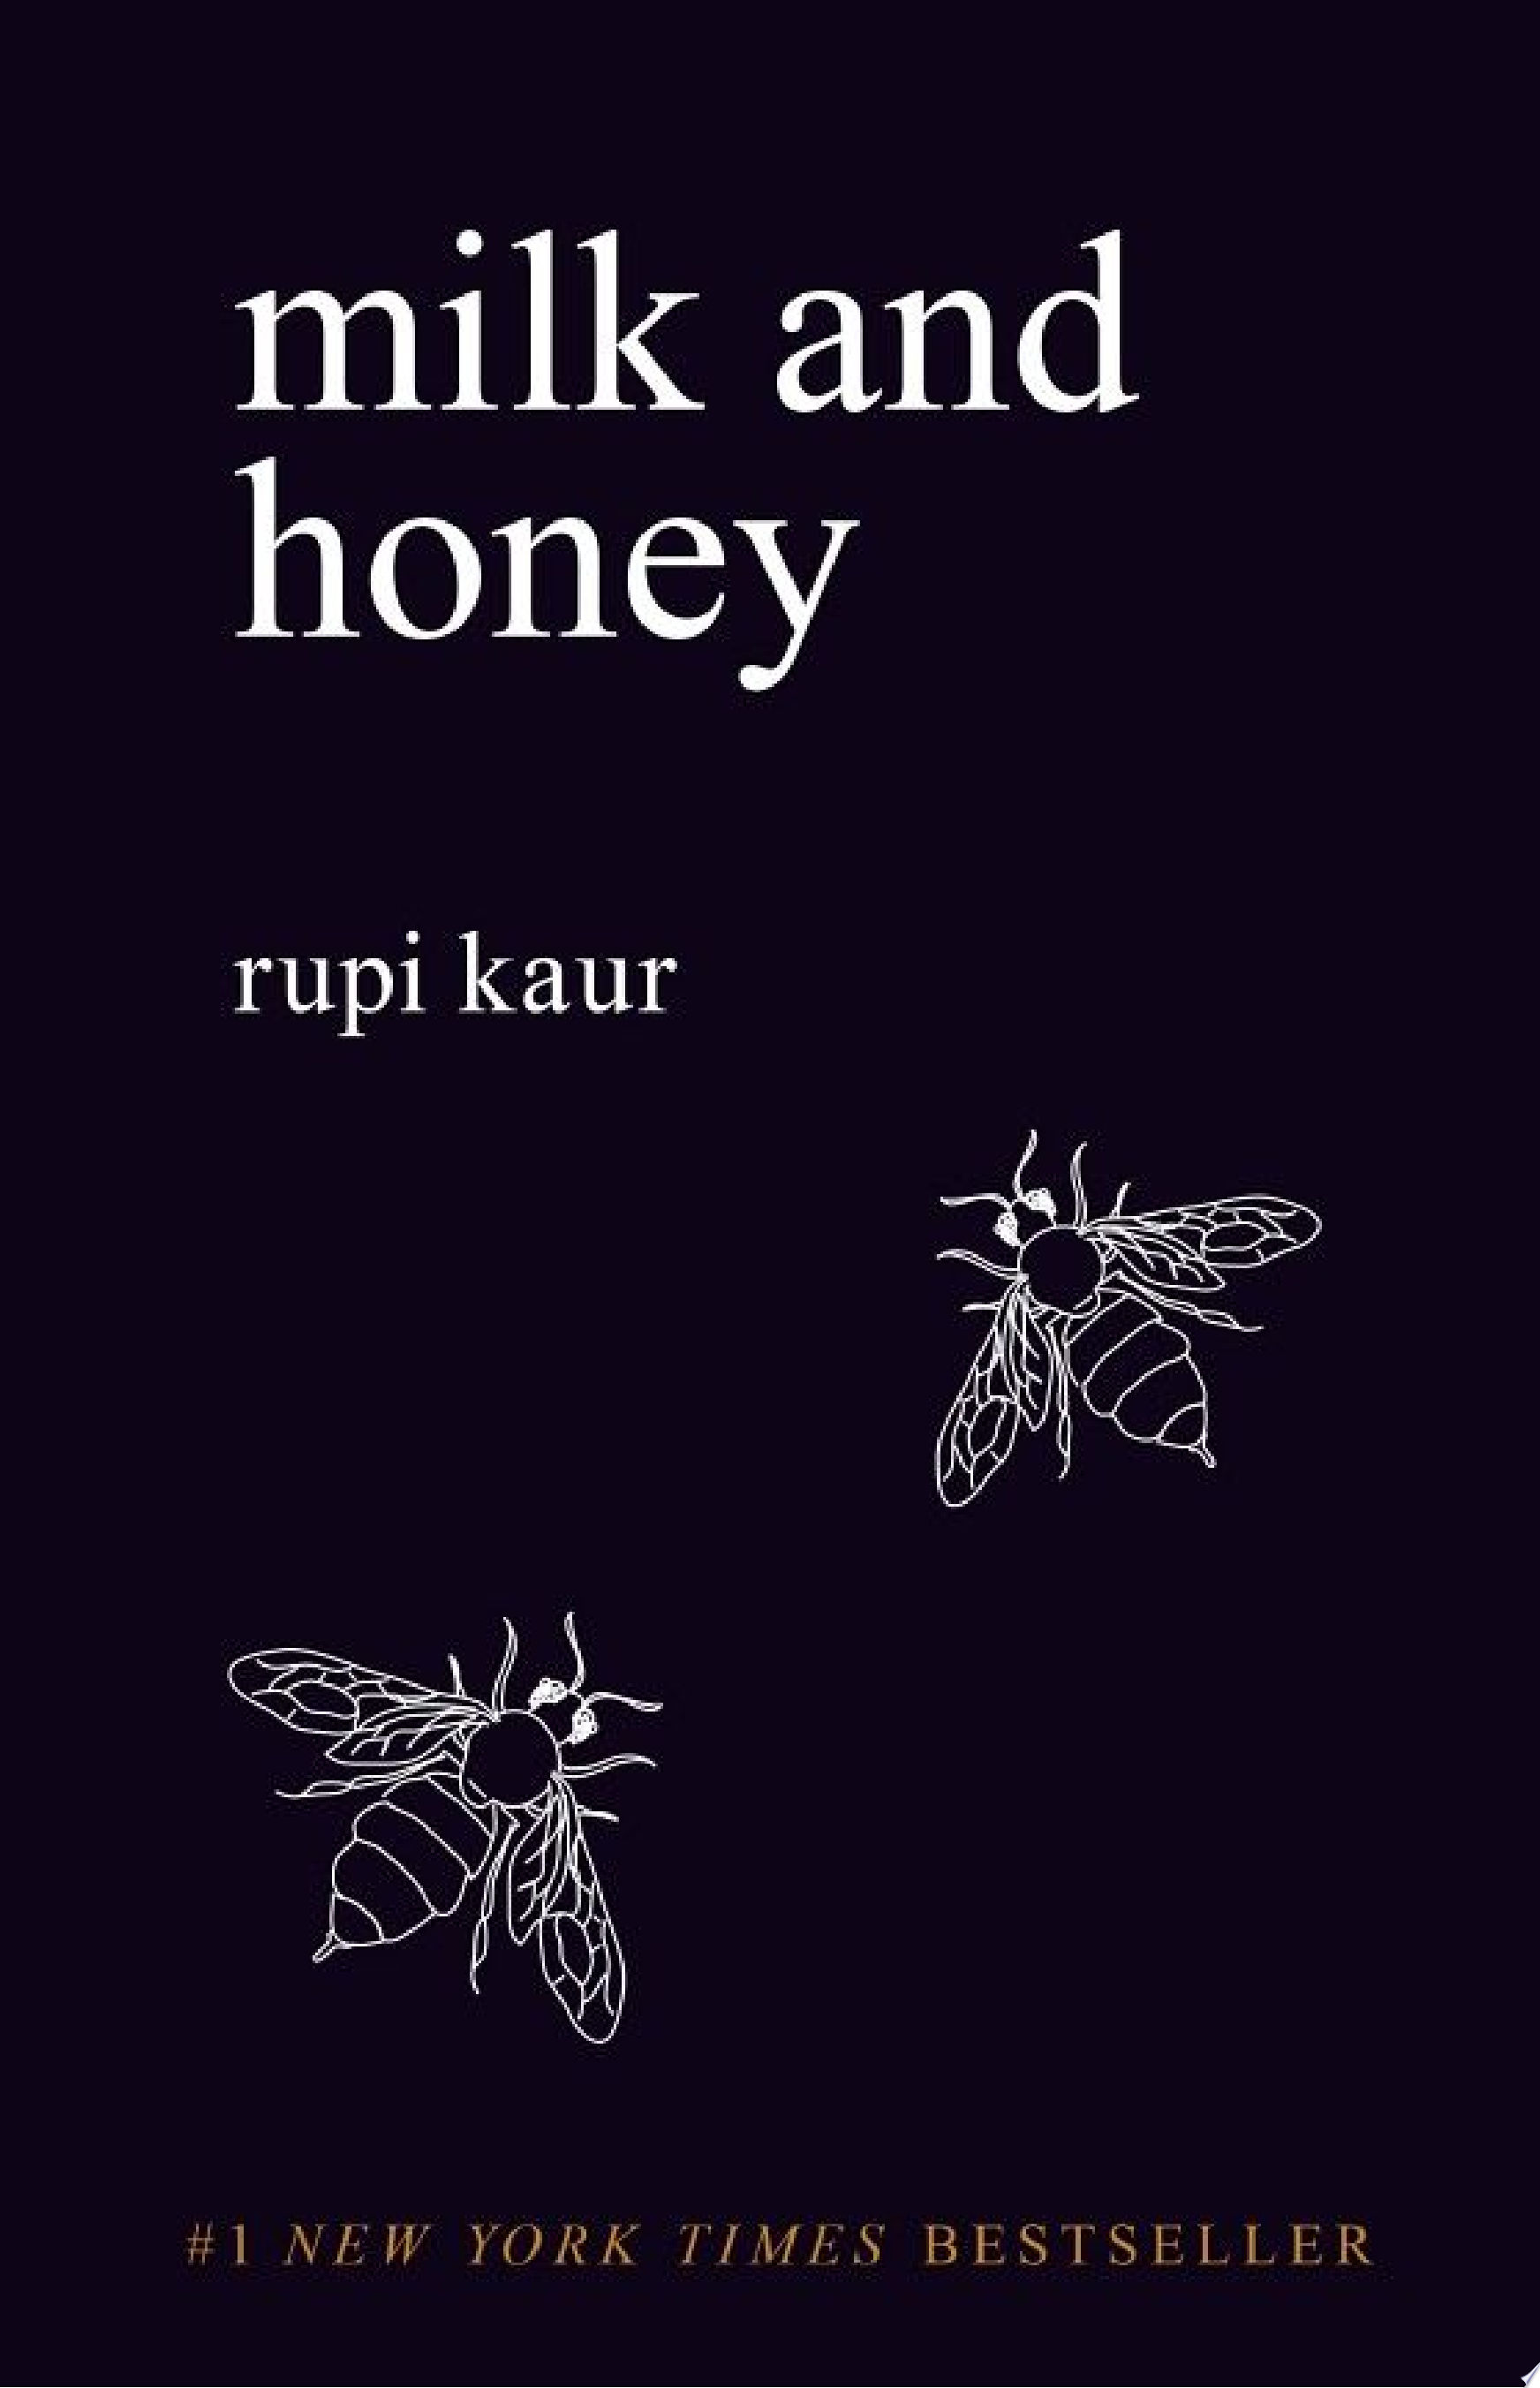 Image for "Milk and Honey"